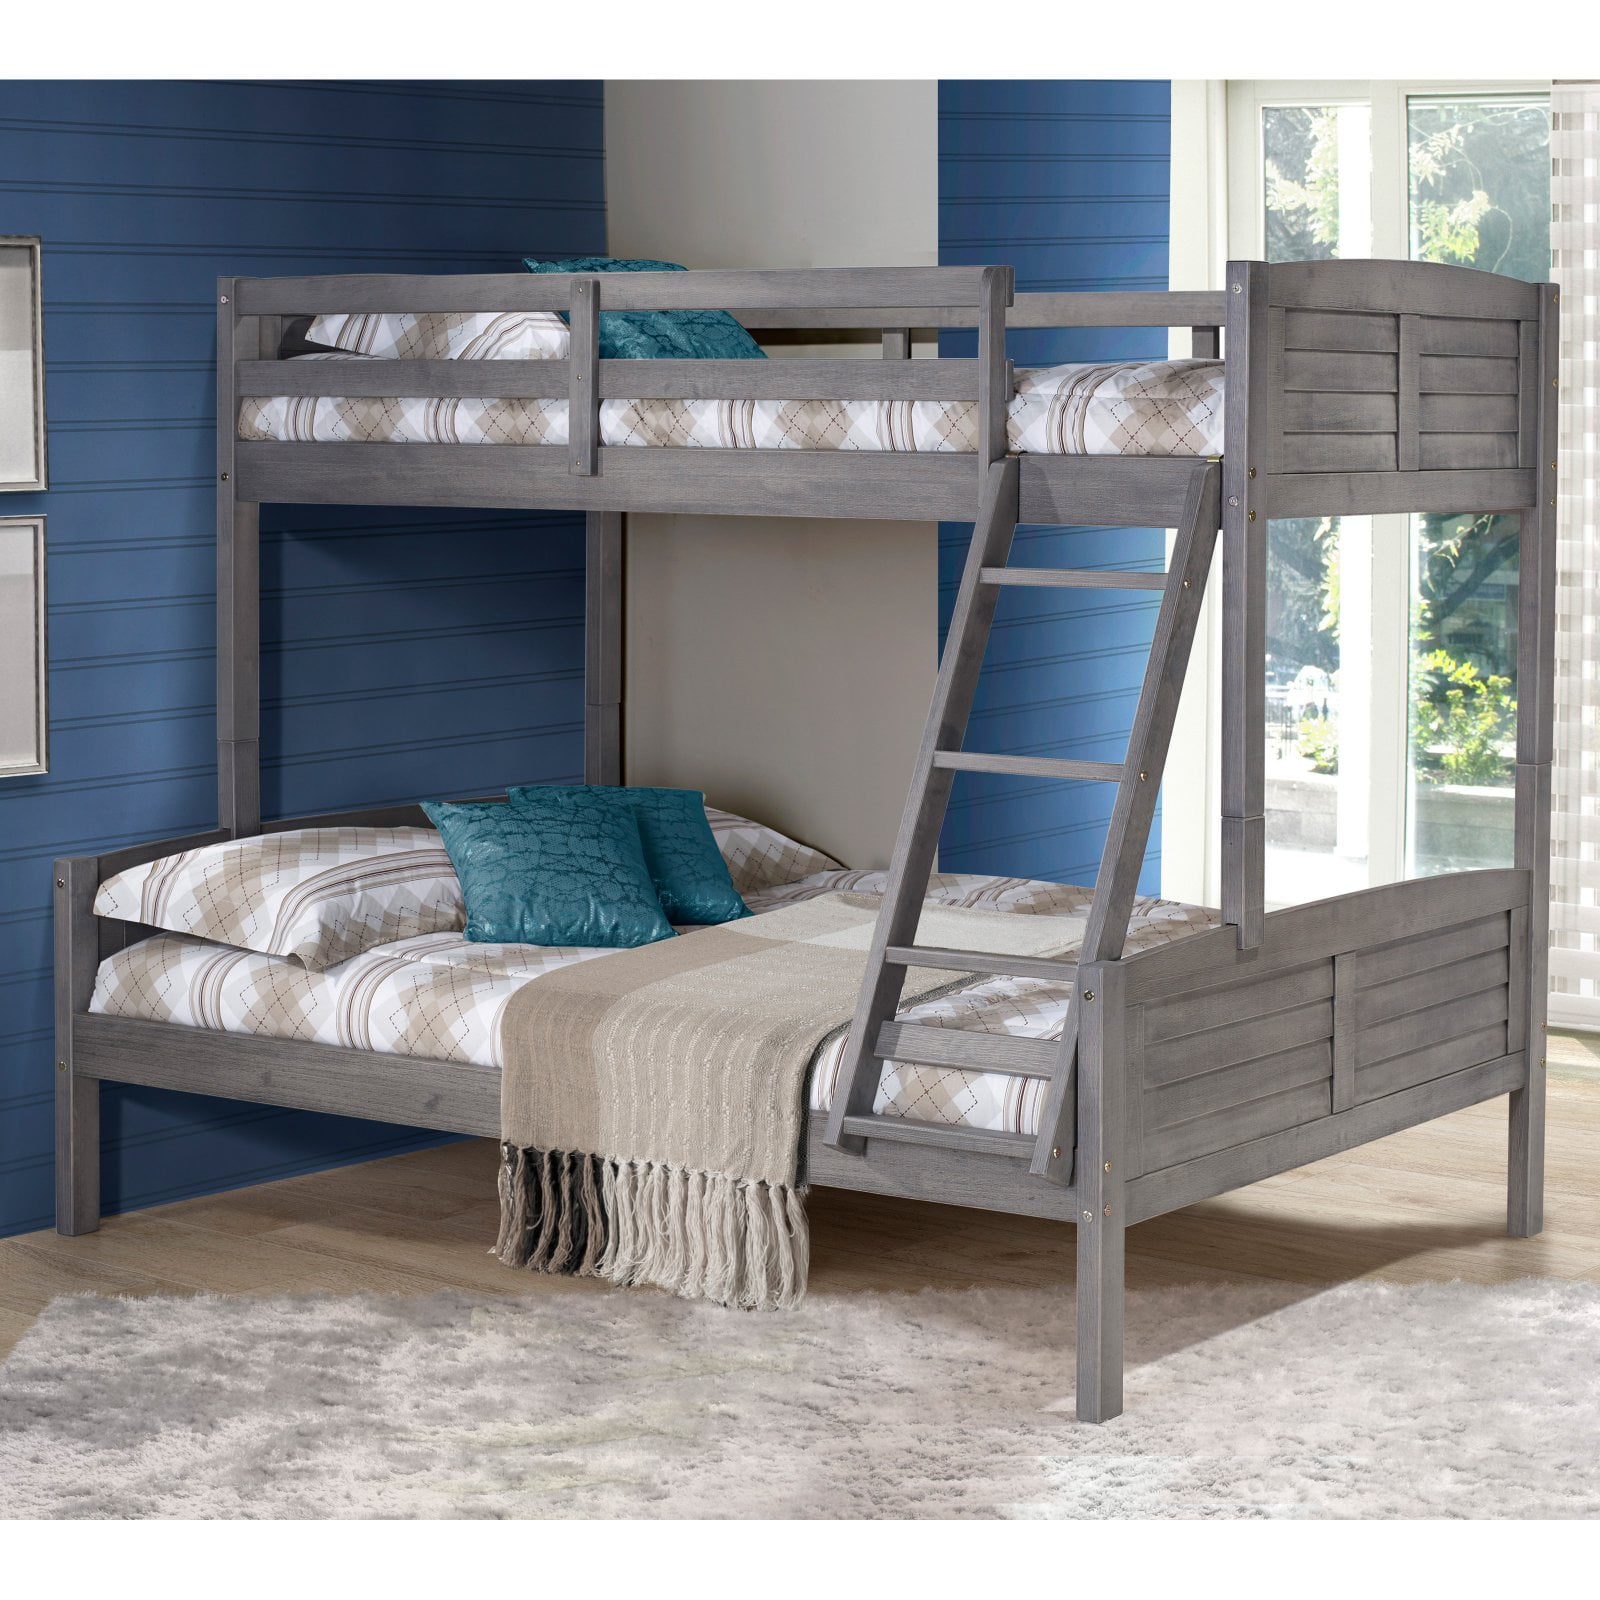 Donco Kids Louver Wood Bunk Bed Twin, Antique Looking Bunk Beds